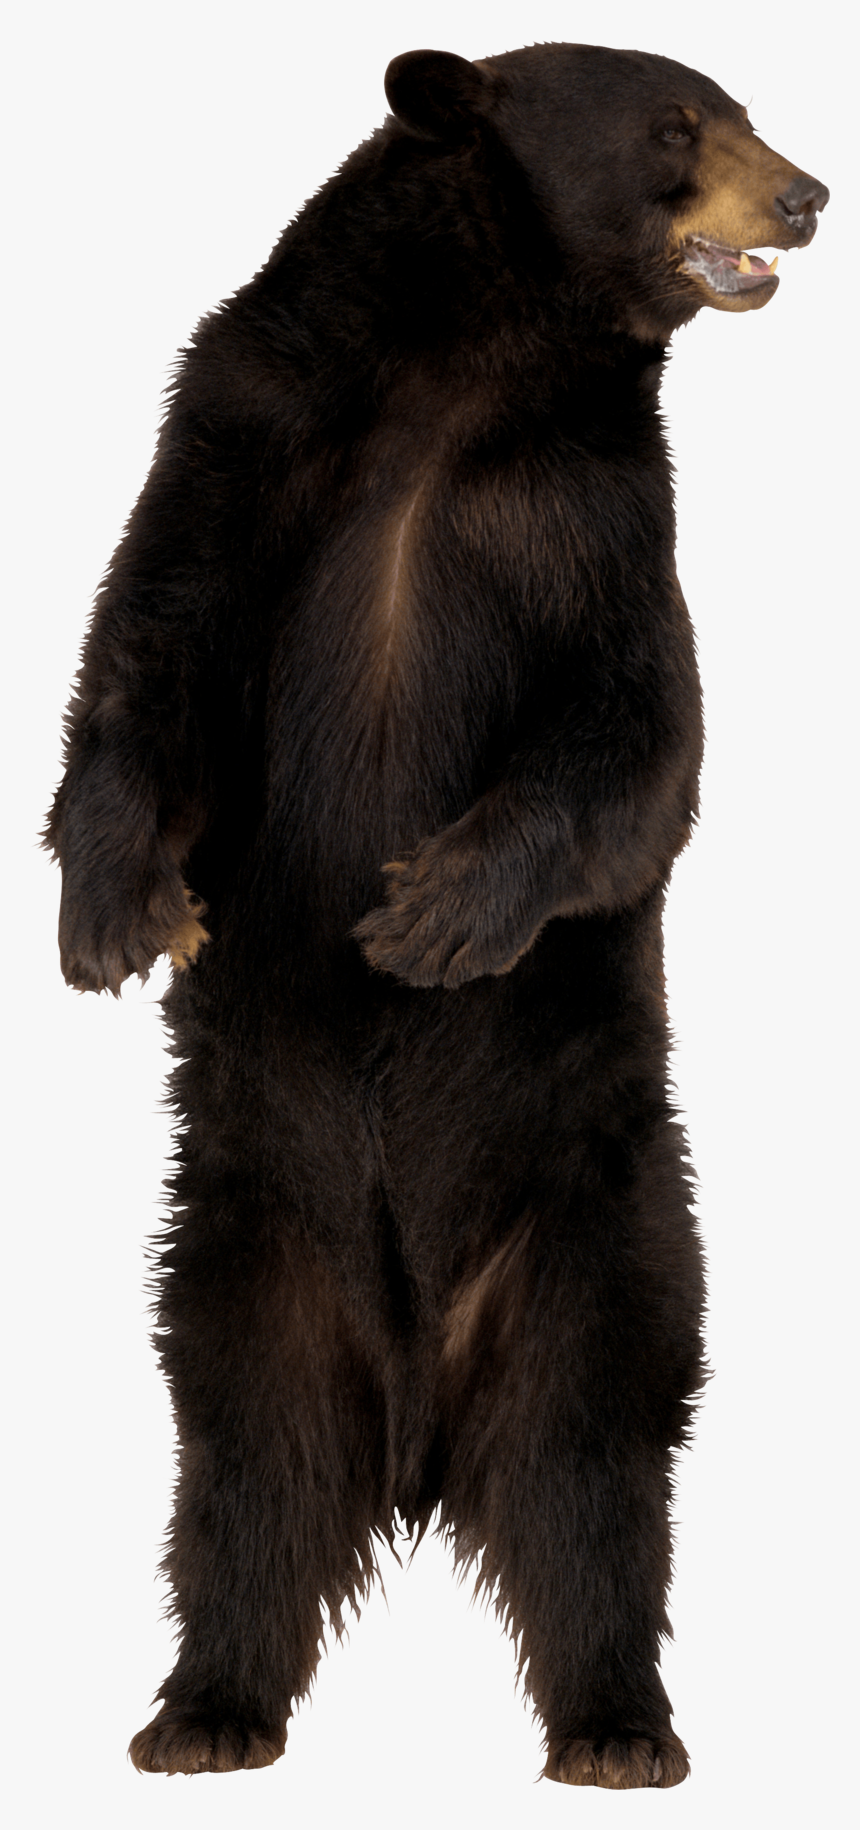 Angry Bear Png Image Free Download - Angry Bear Png, Transparent Png, Free Download